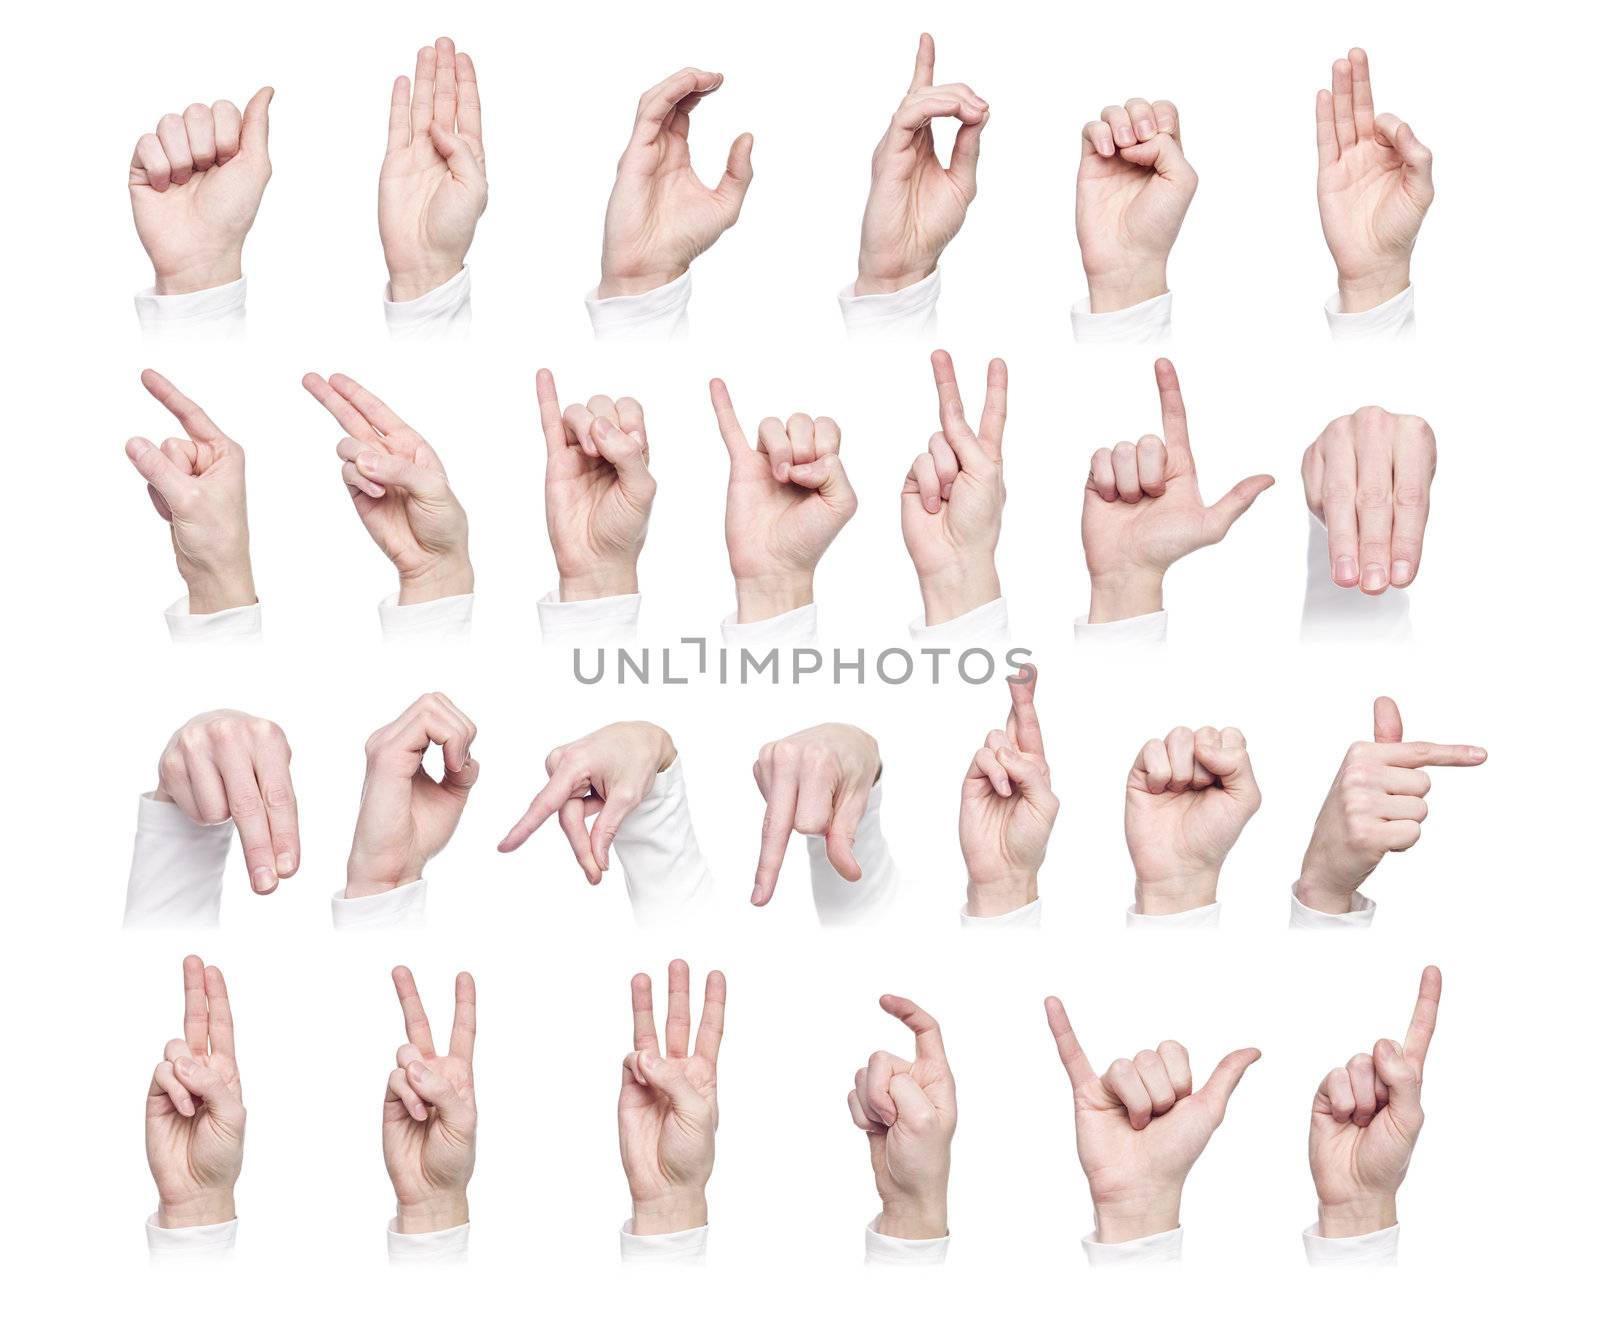 Hands forming the international sign language isolated against a white background